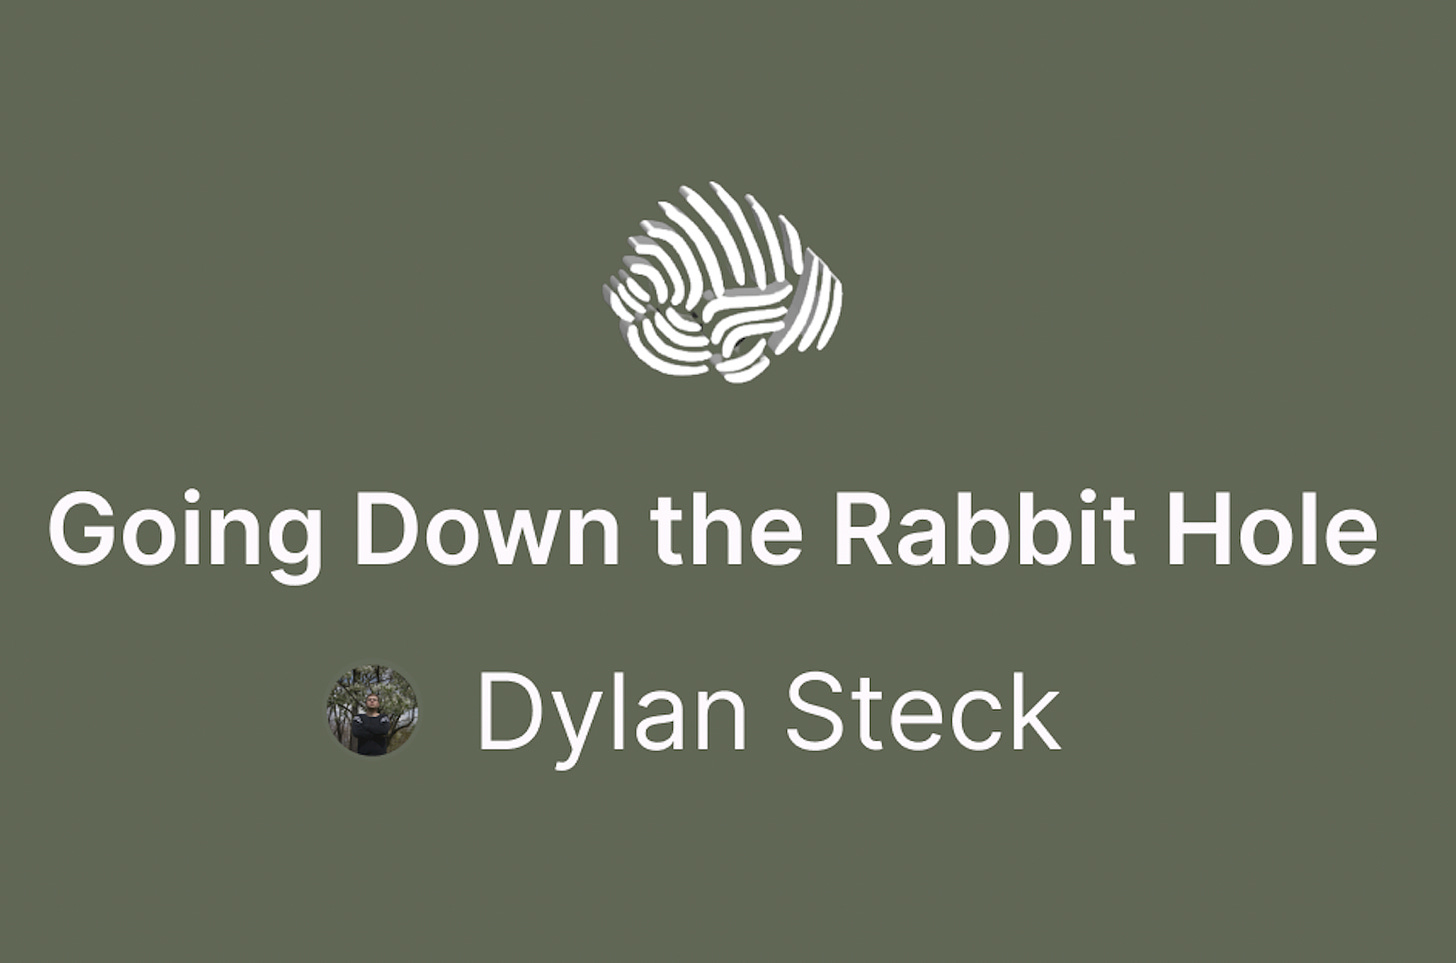 Going Down the Rabbit Hole by Dylan Steck